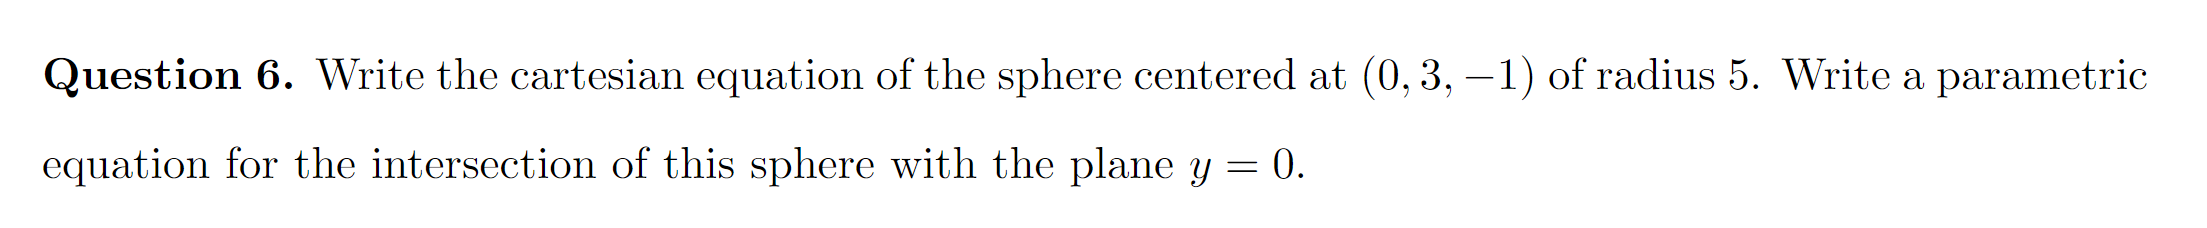 Question 6. Write the cartesian equation of the sphere centered at (0, 3, –1) of radius 5. Write a parametric
equation for the intersection of this sphere with the plane y = 0.
